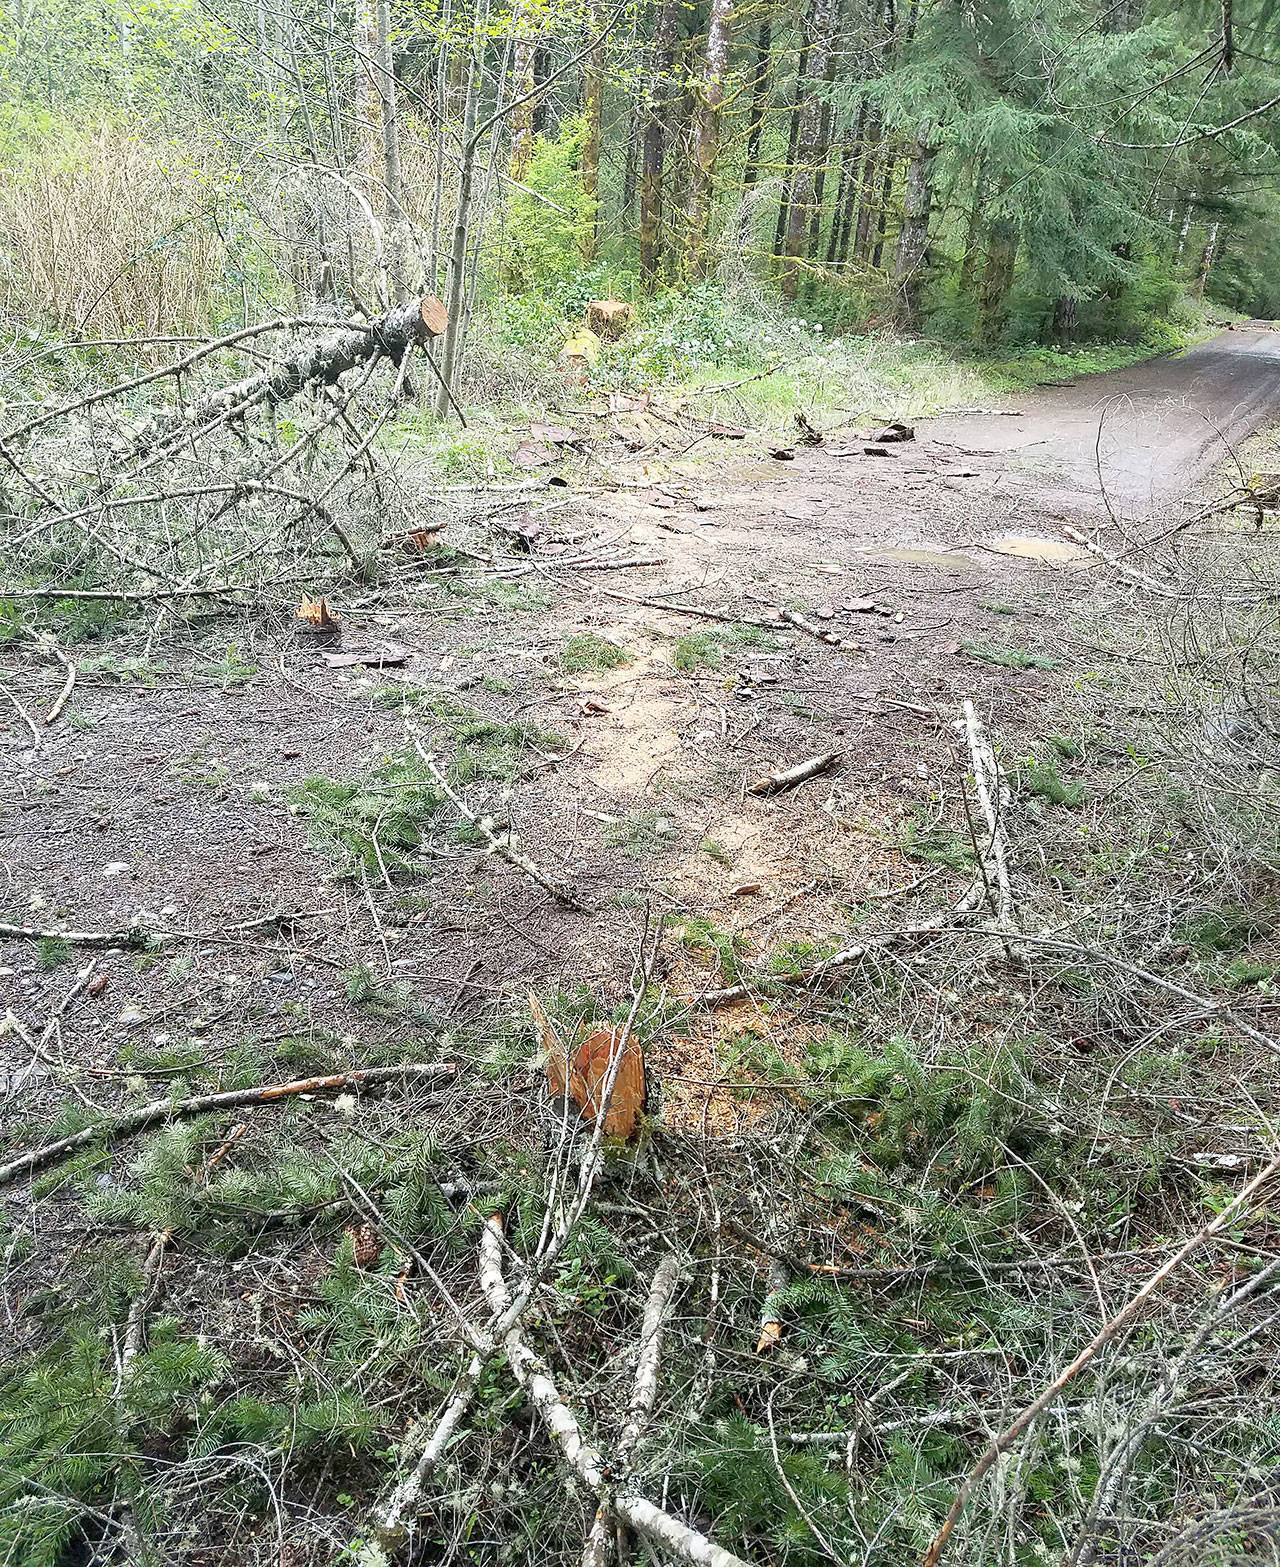 (Photo courtesy Loren Hiner, City of Montesano) The remains of an illegally harvested tree partially block a road in Montesano-owned forest land.